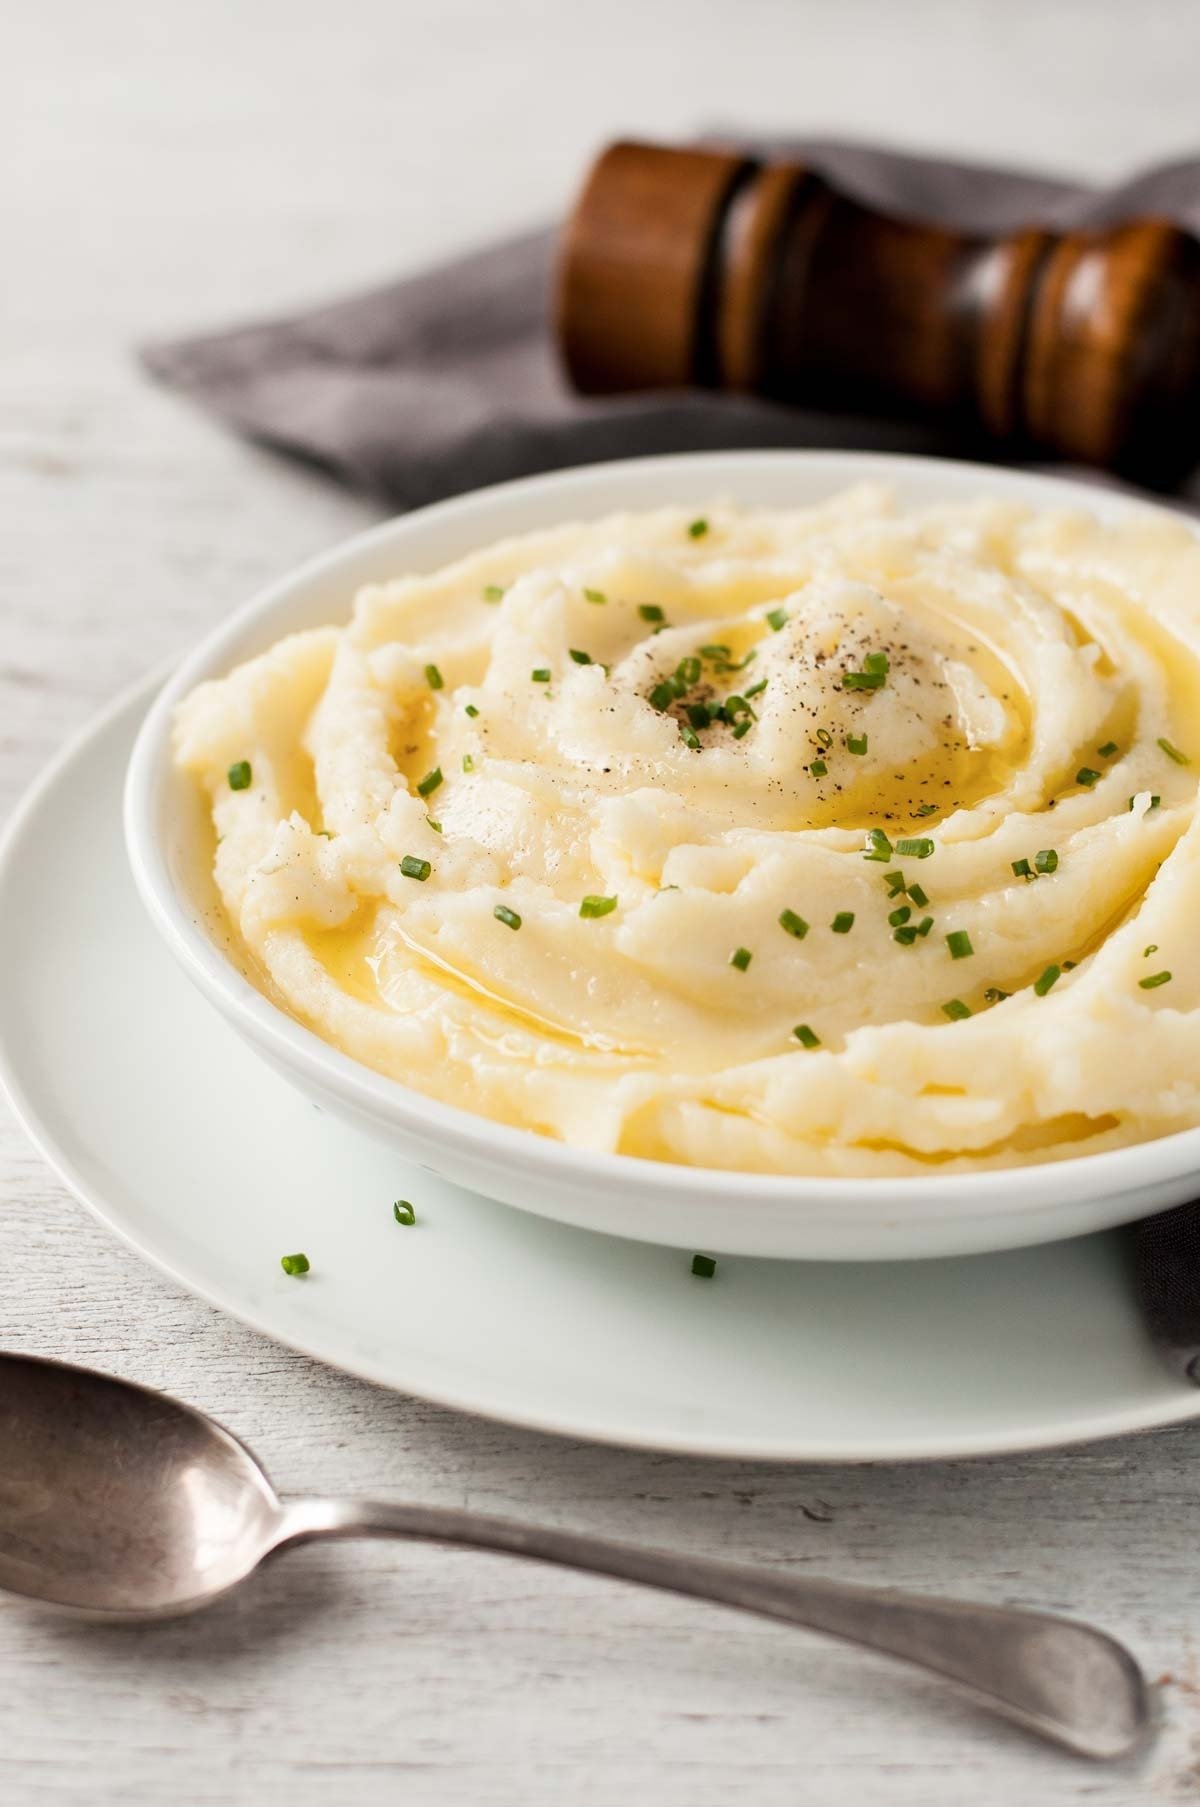 10 Fashionable Dinner Ideas With Mashed Potatoes make ahead mashed potatoes restaurant trick recipetin eats 2022